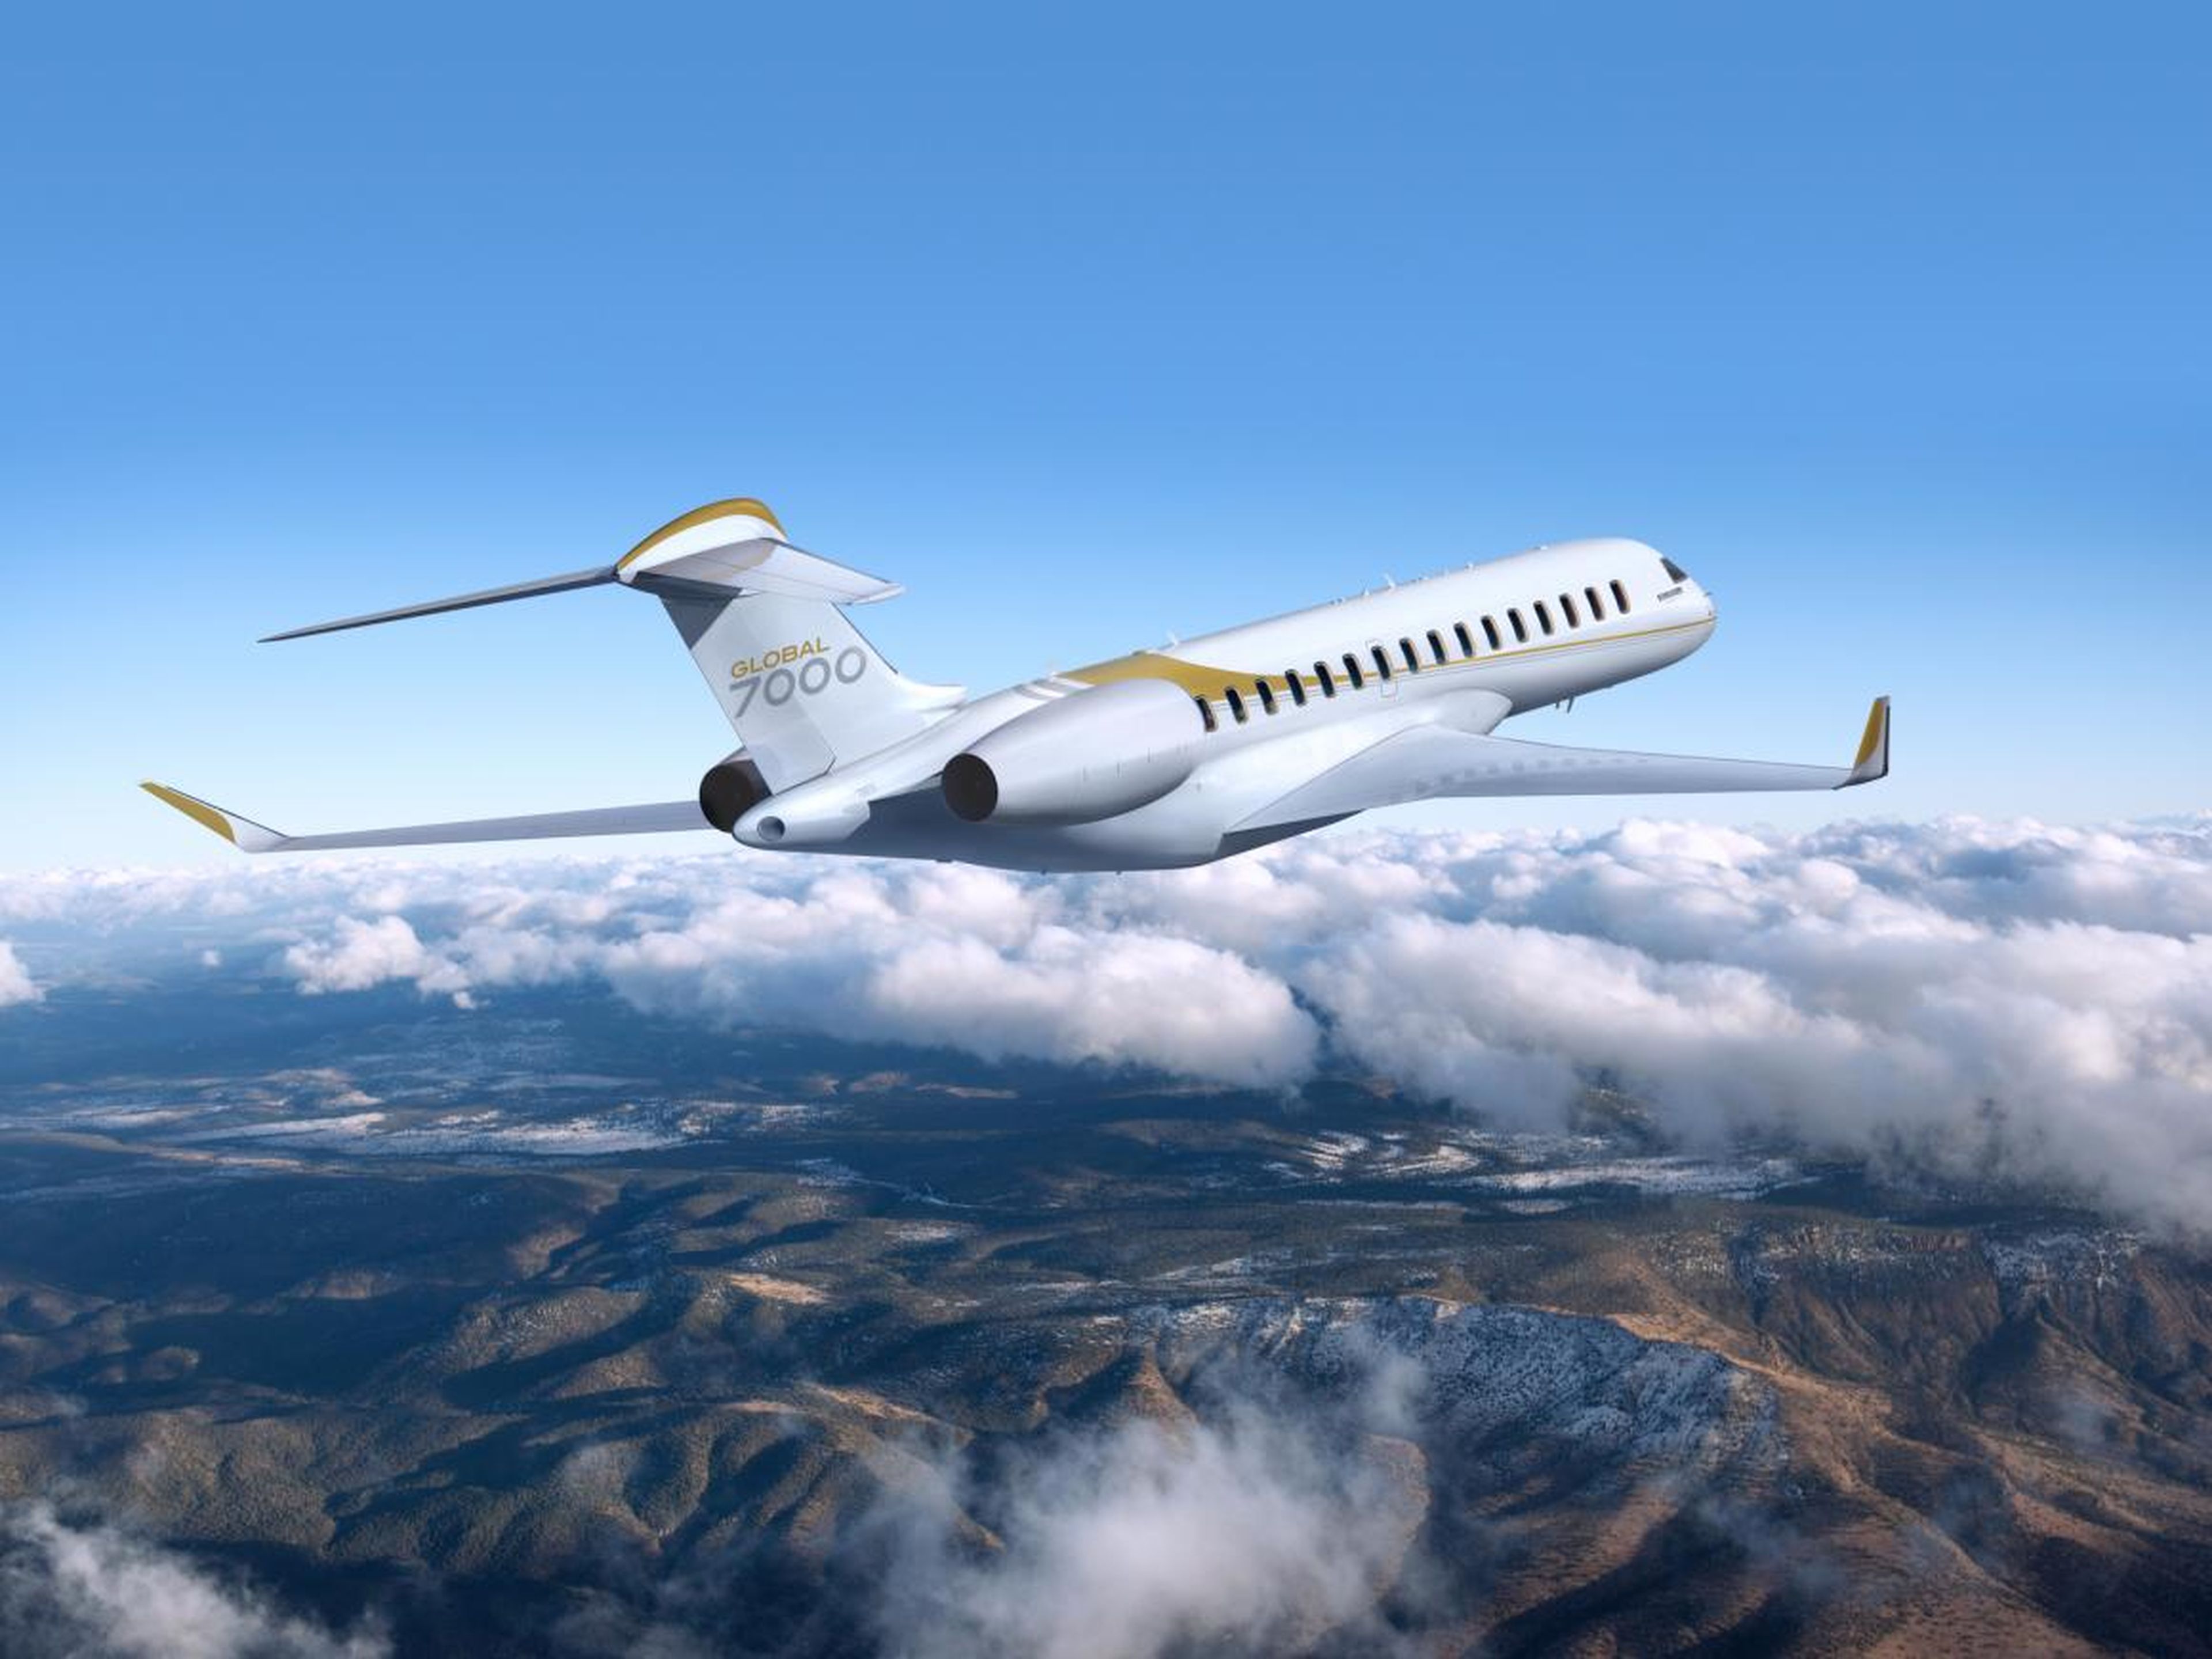 The Global 7500 has a range of just under 8,900 miles.